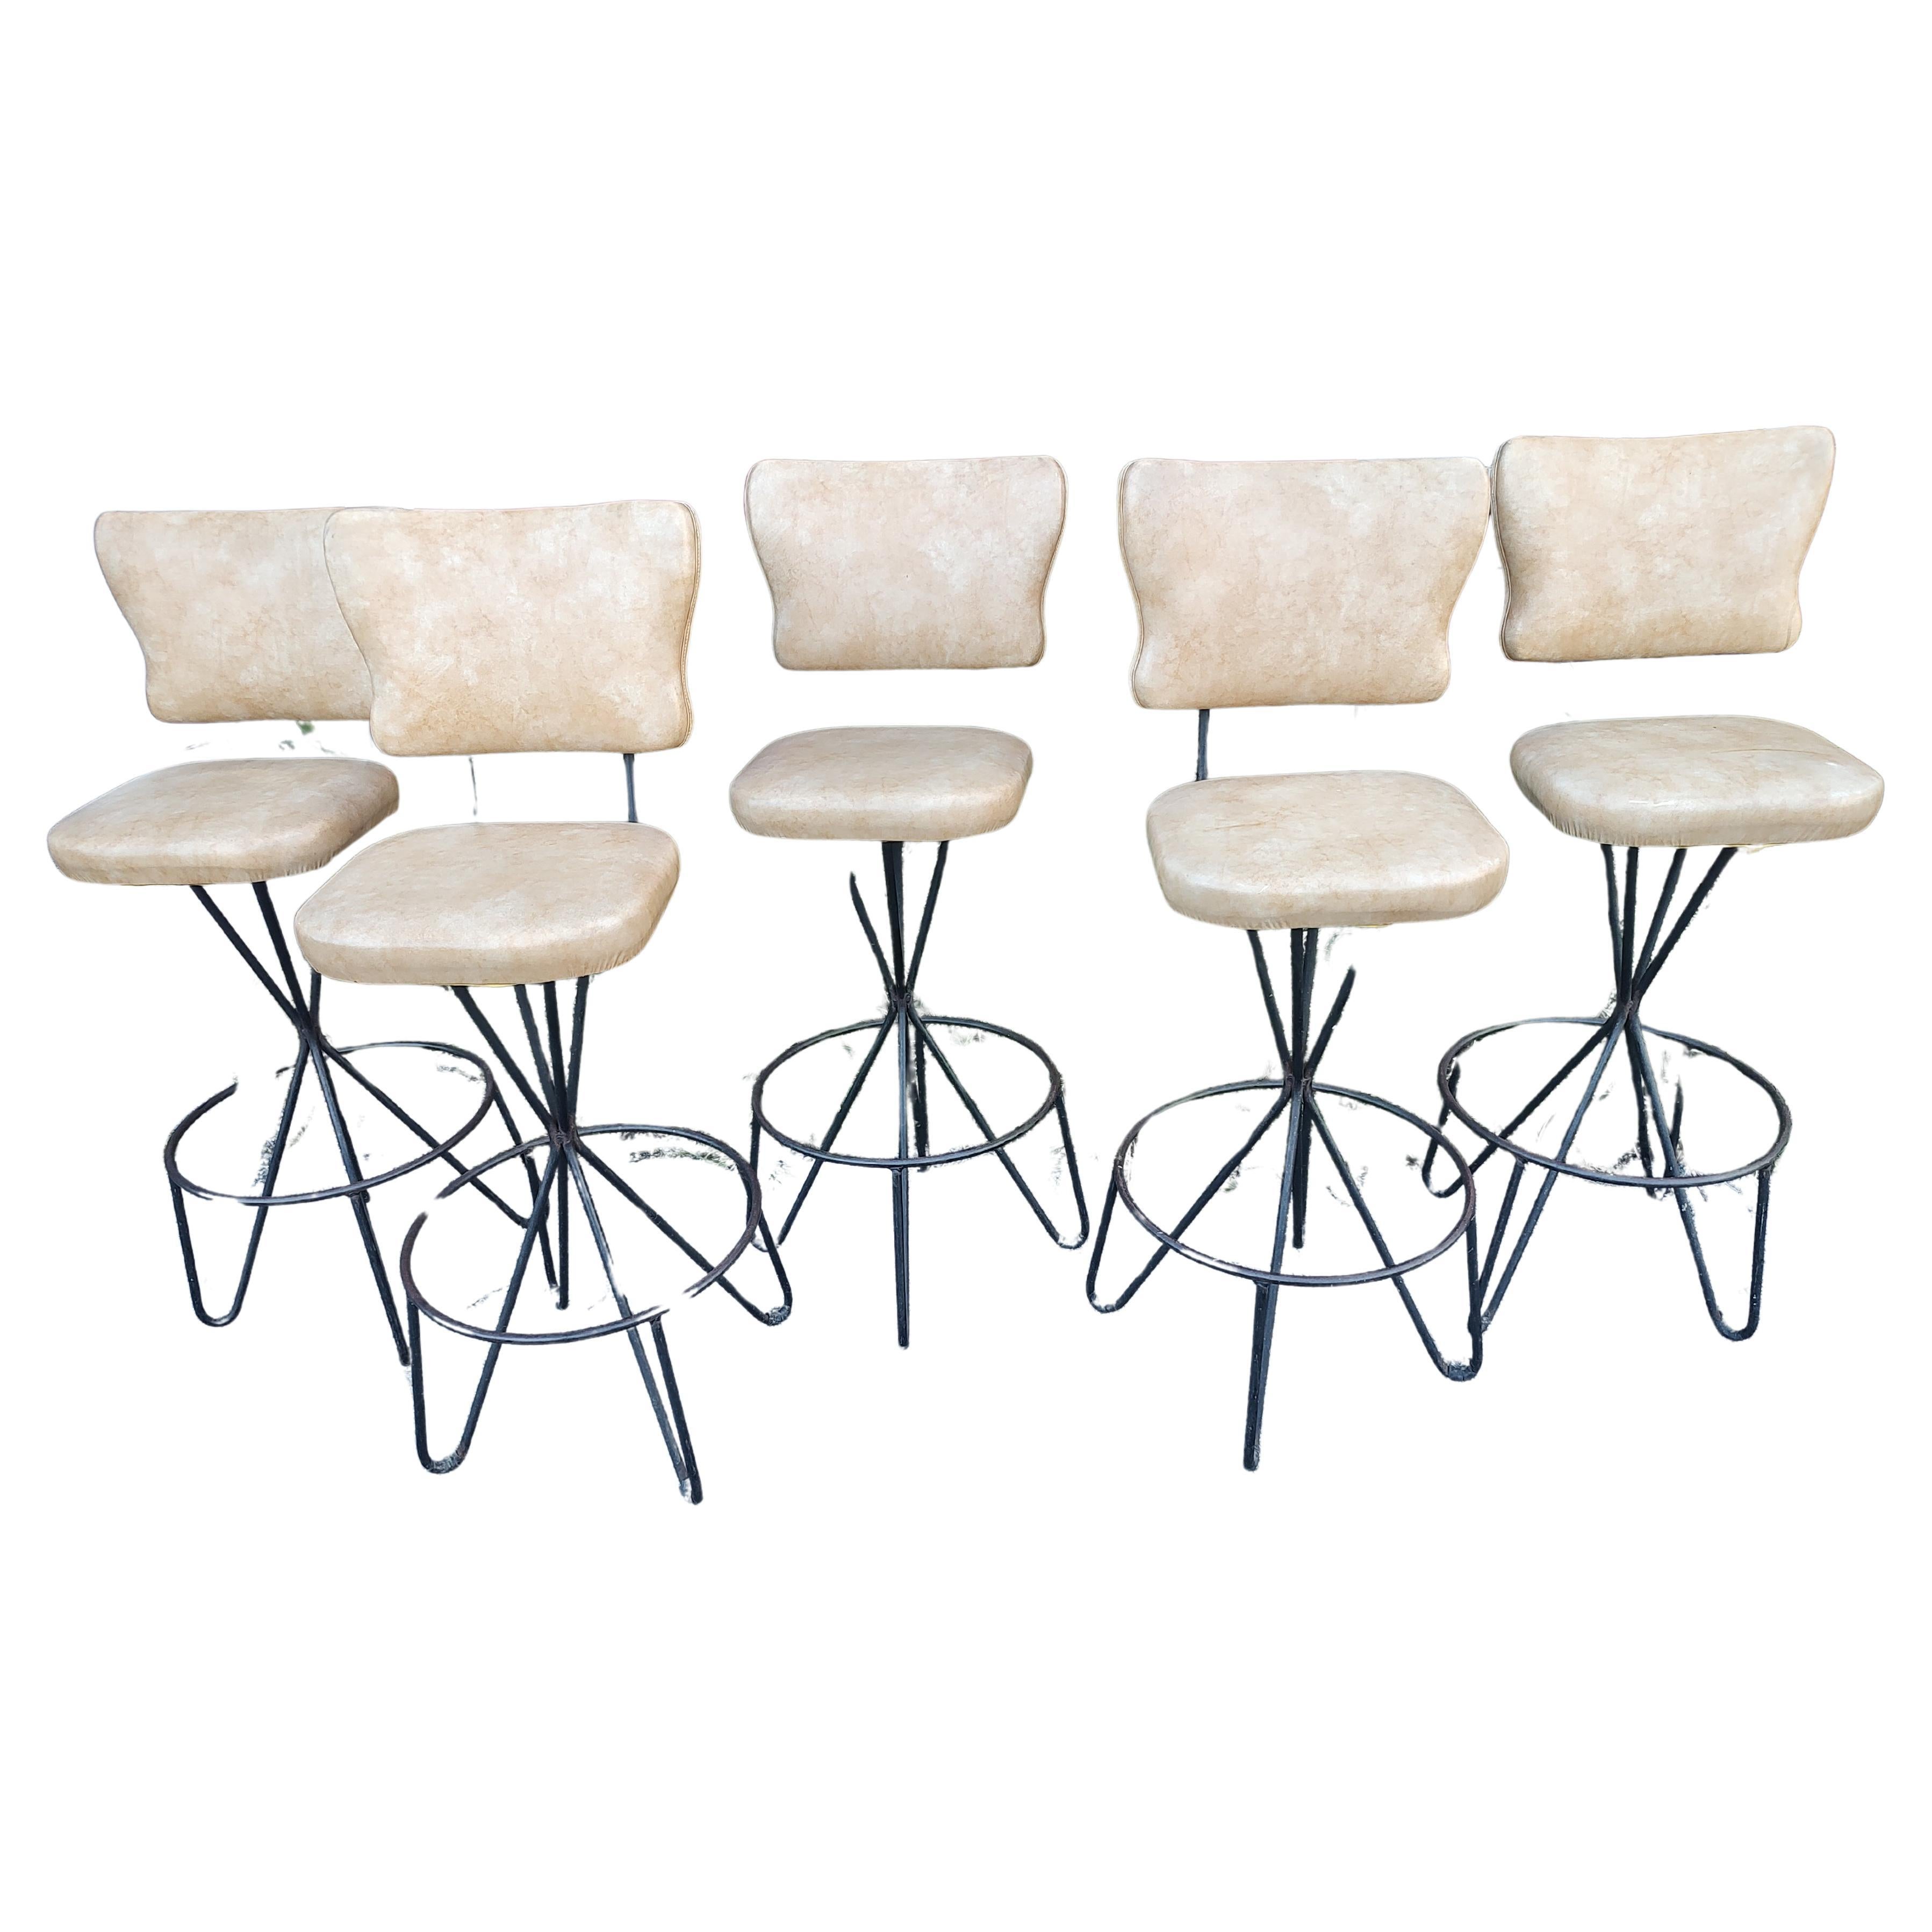 Hand-Crafted Mid Century Modern Sculptural Iron Hairpin Swivel Bar Stools by Paul Tuttle For Sale